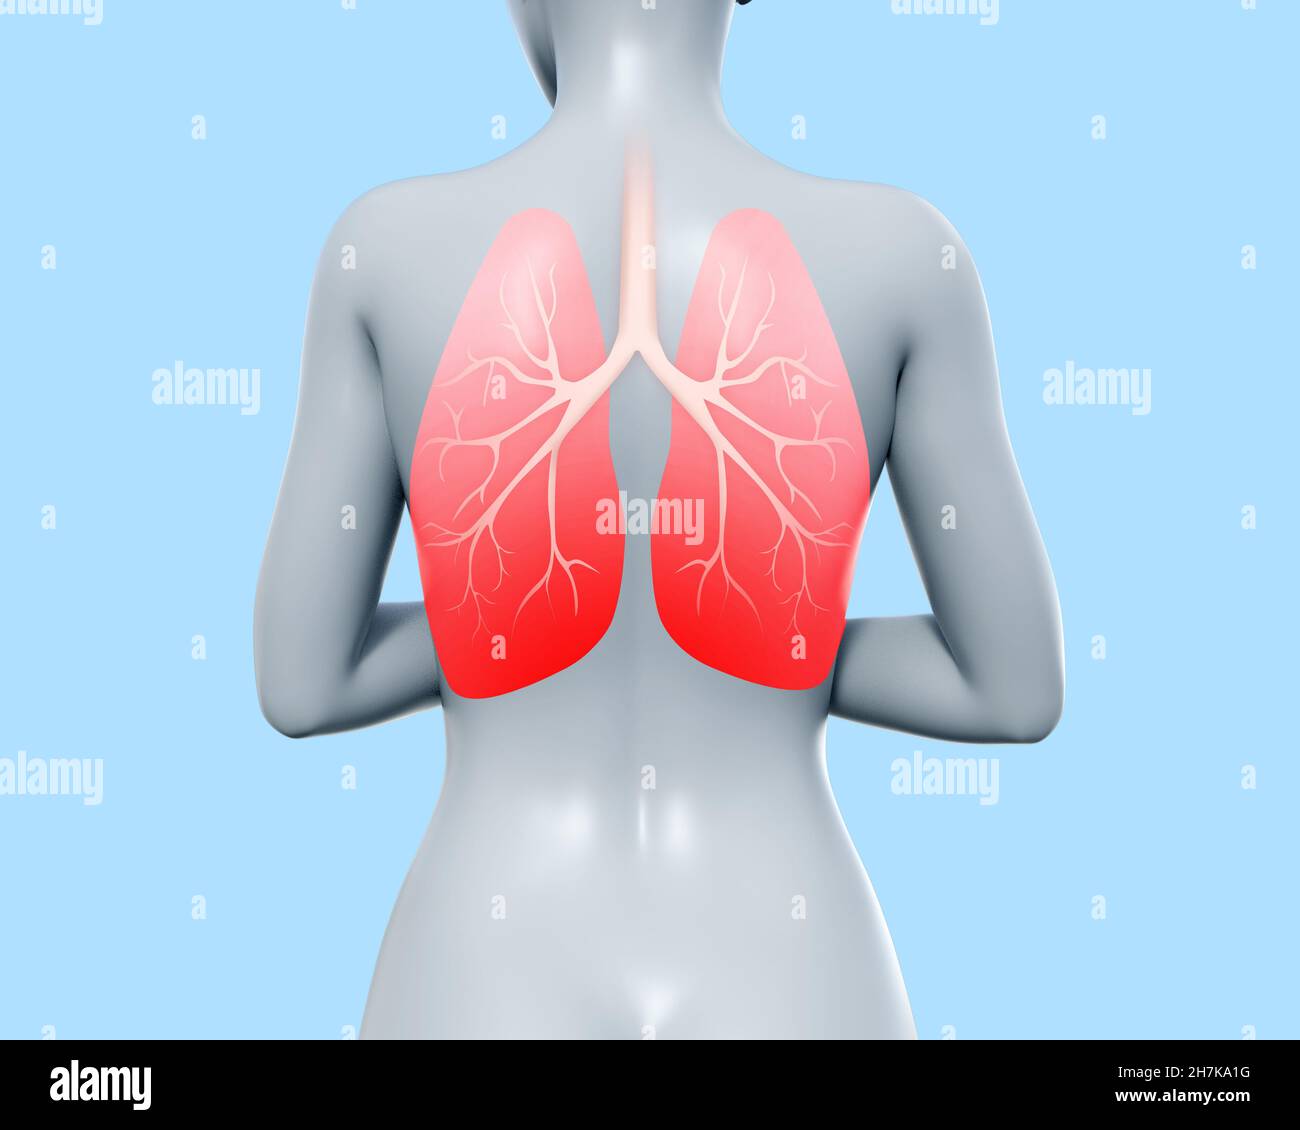 3d render illustration of female figure standing with infammated lungs area on blue background. Stock Photo